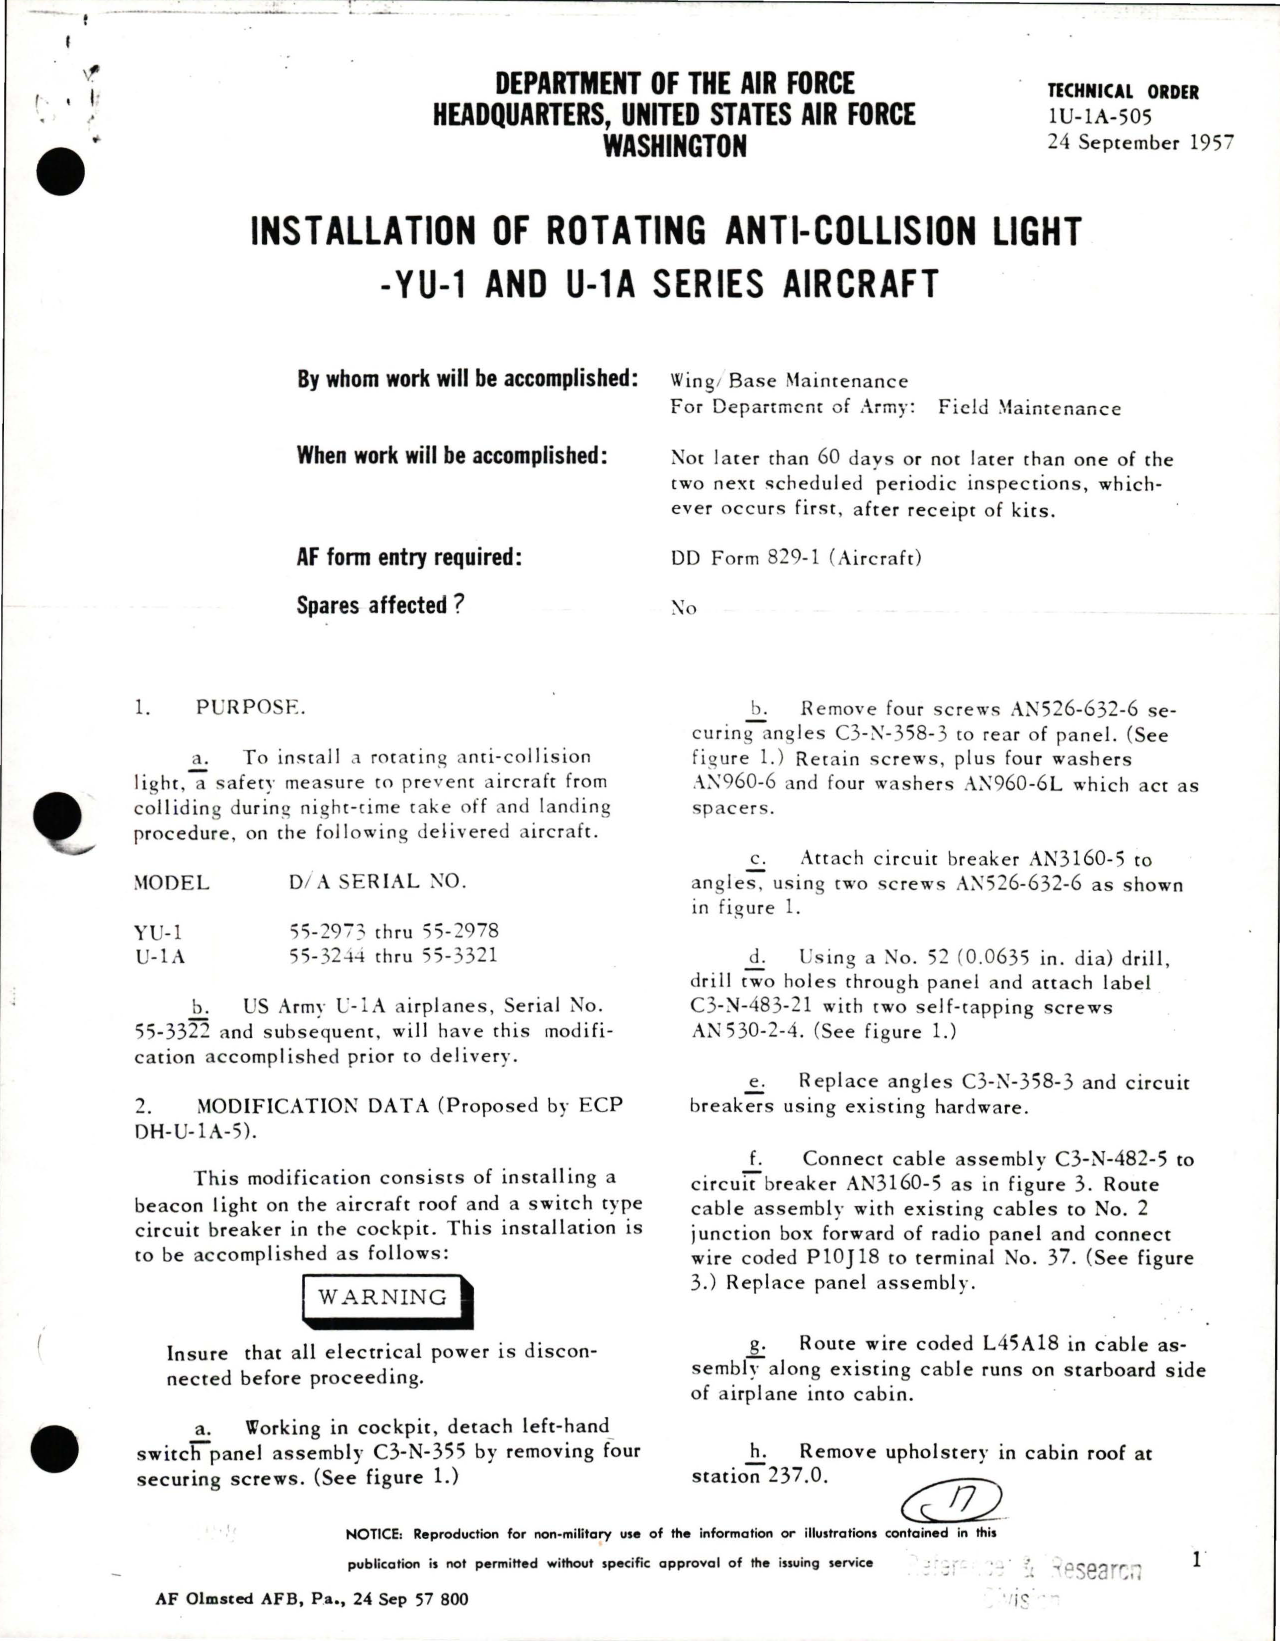 Sample page 1 from AirCorps Library document: Installation of Rotating Anti-Collision Light for YU-1 and U-1A